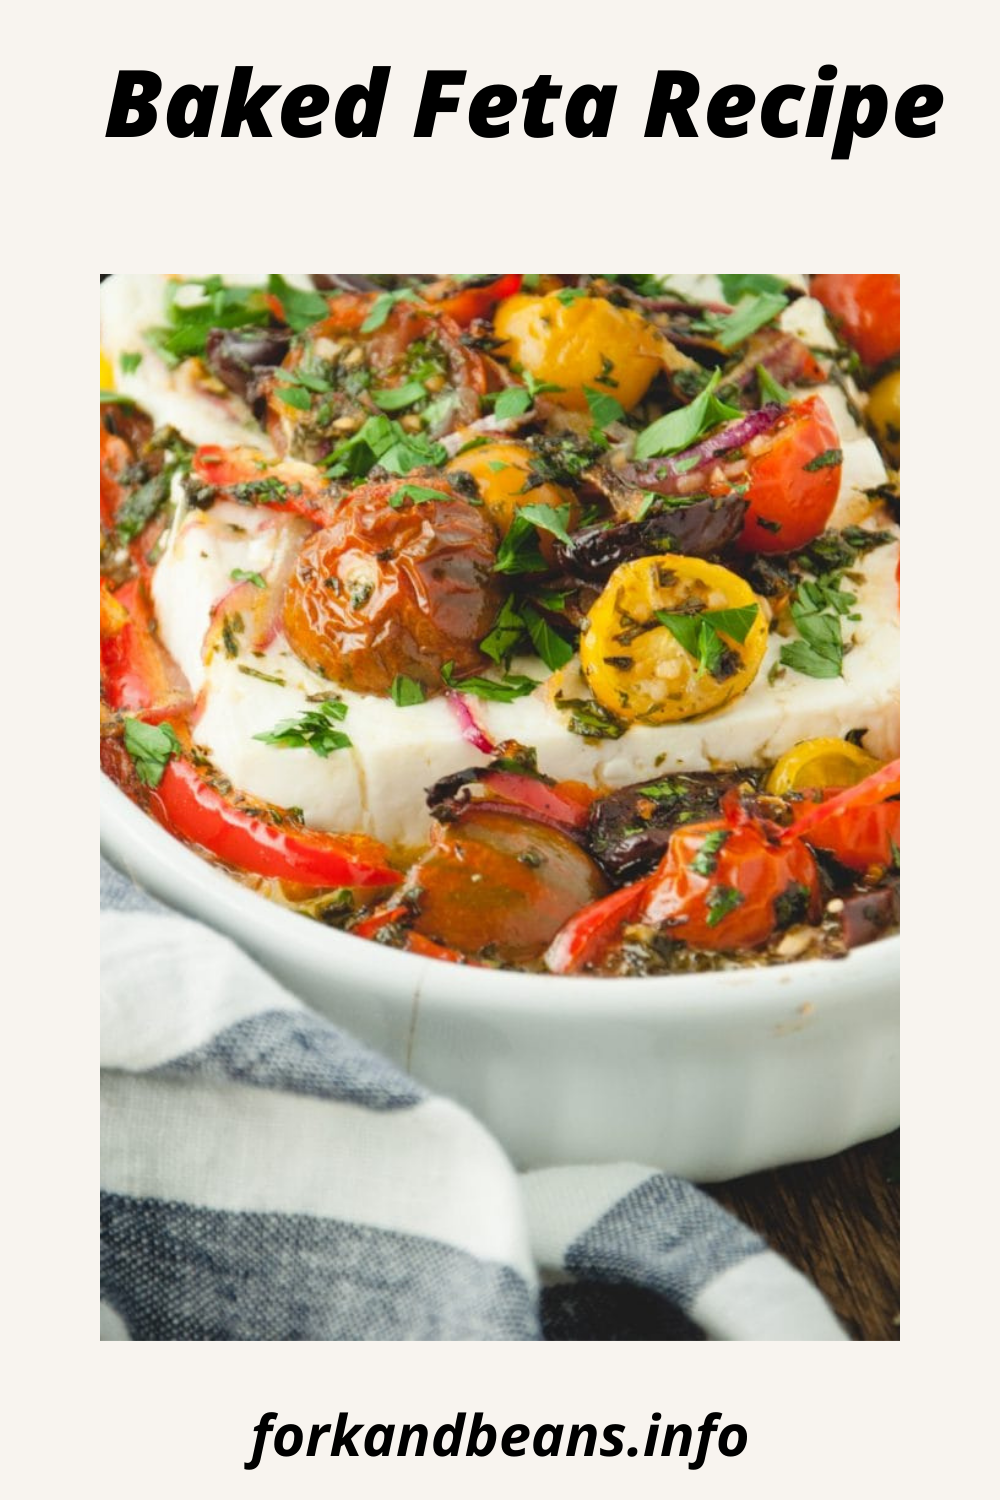 Baked Feta with Tomatoes and Oliives